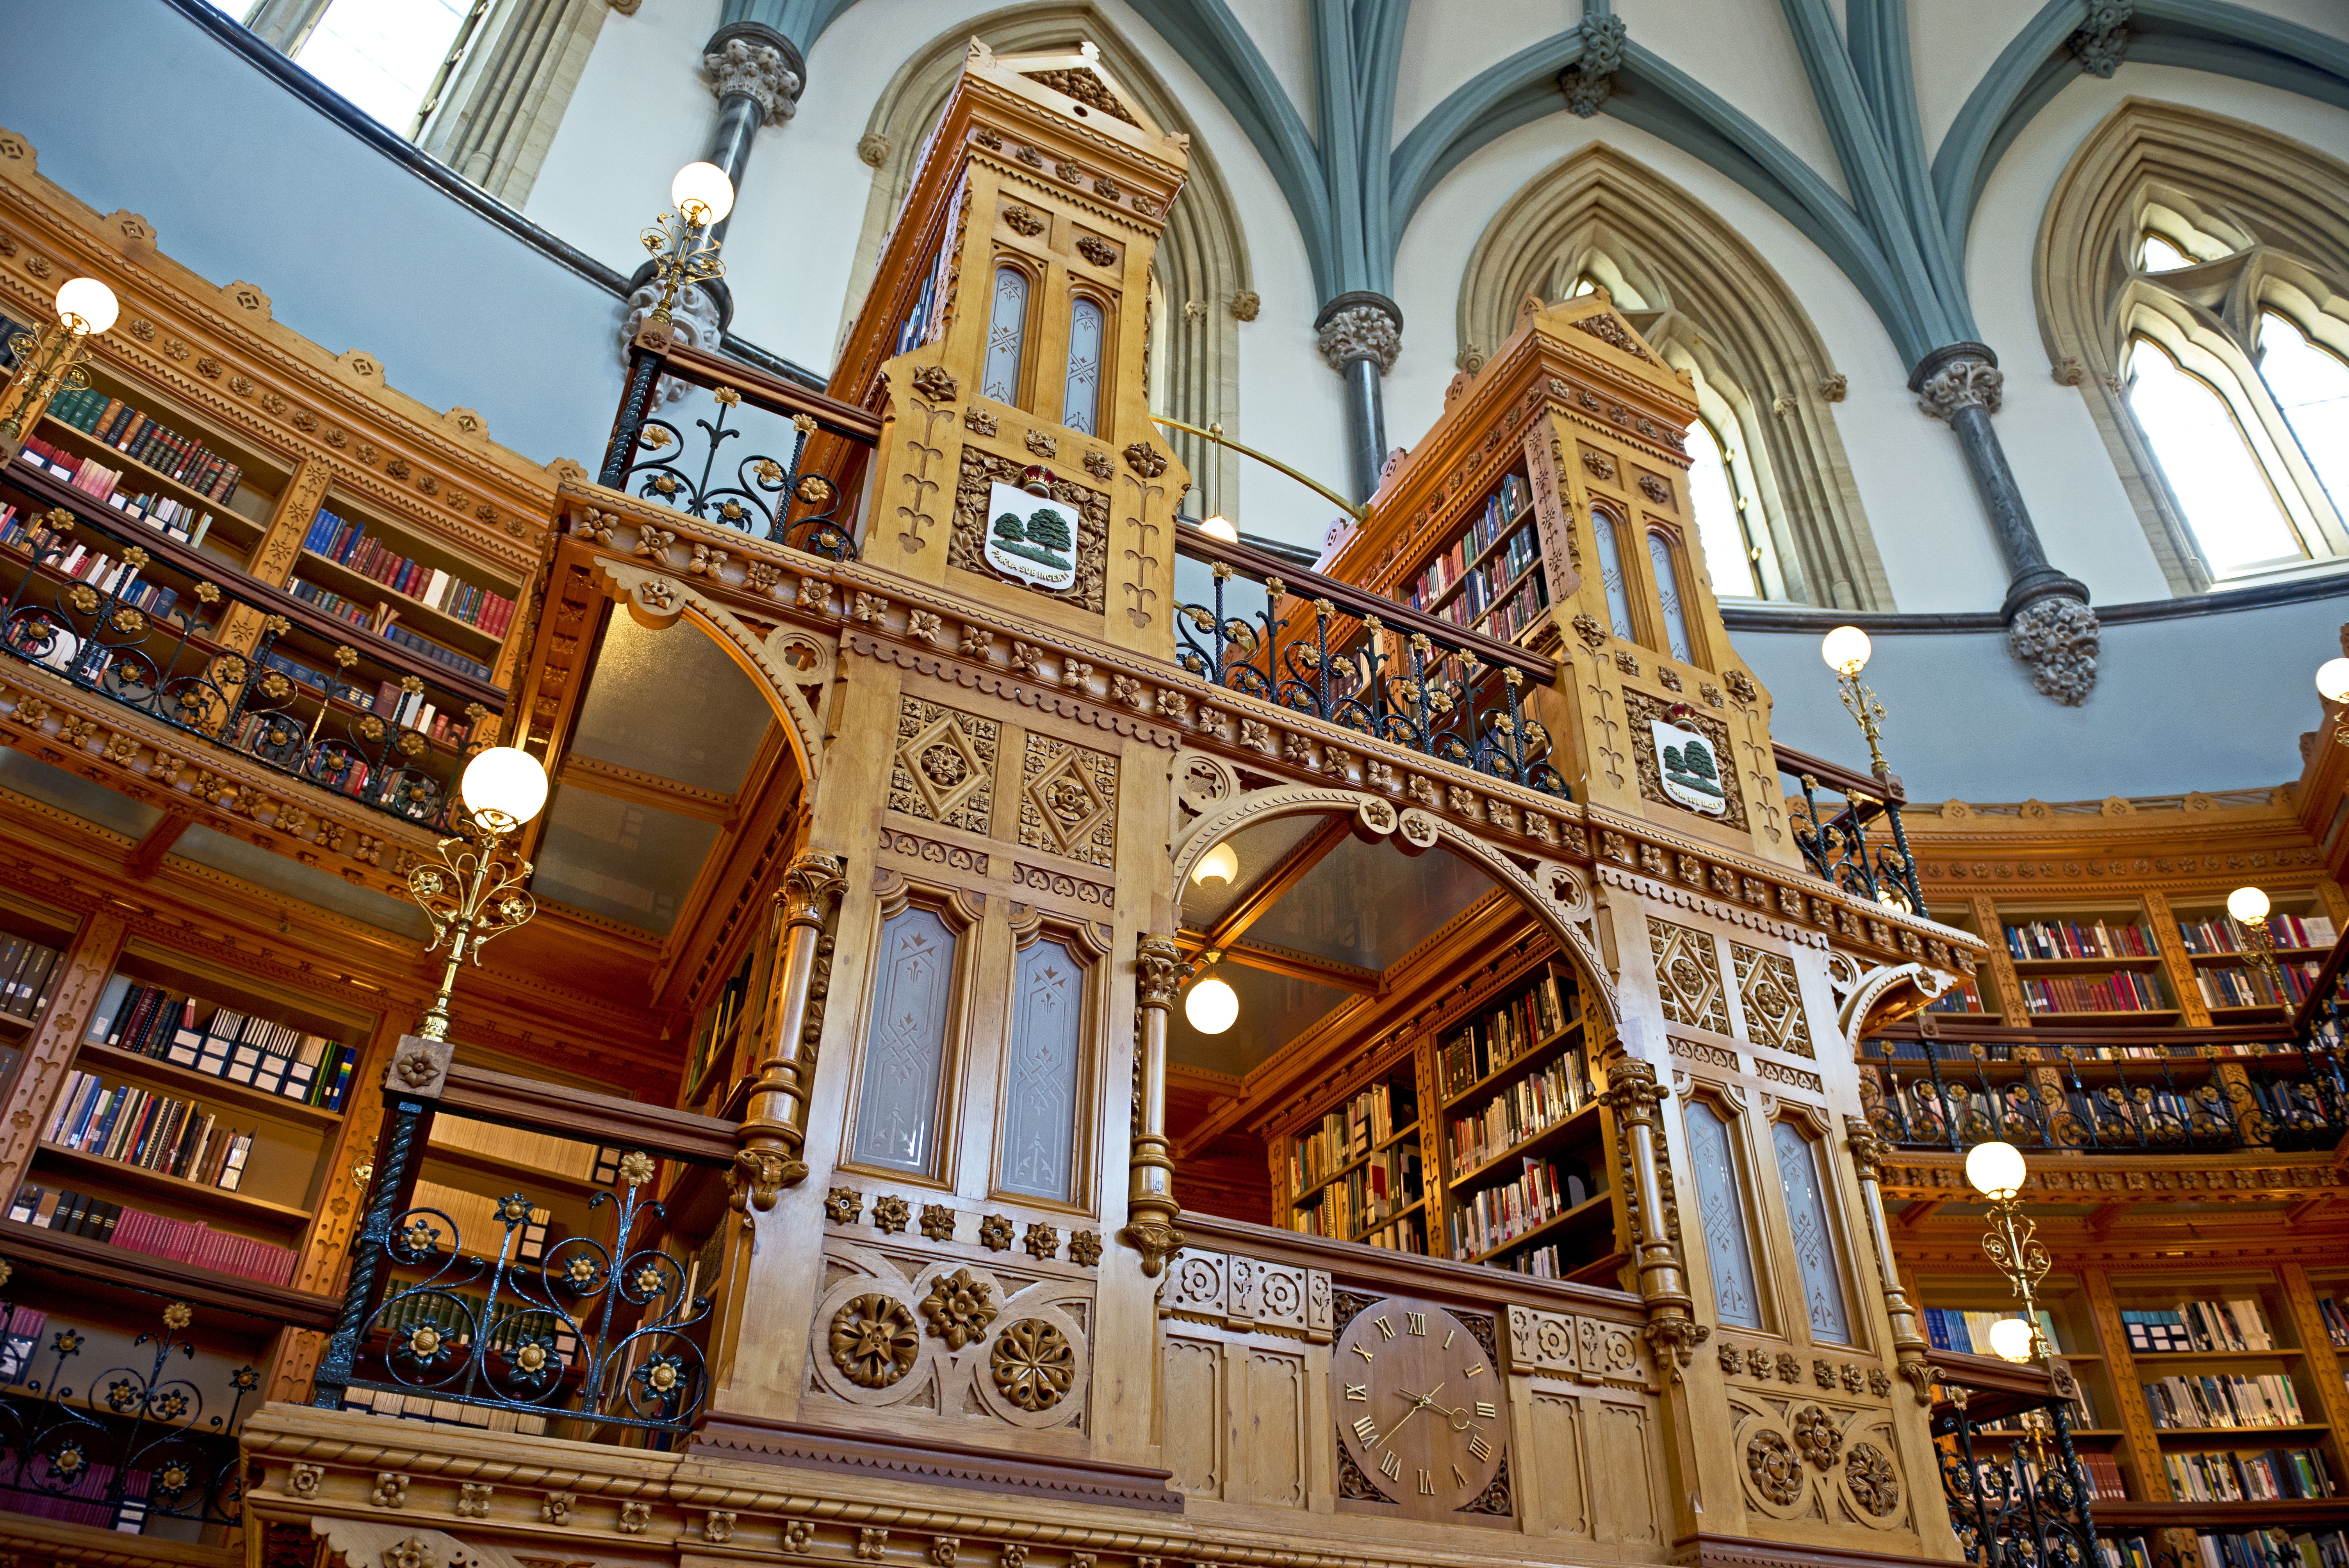 An ornate library